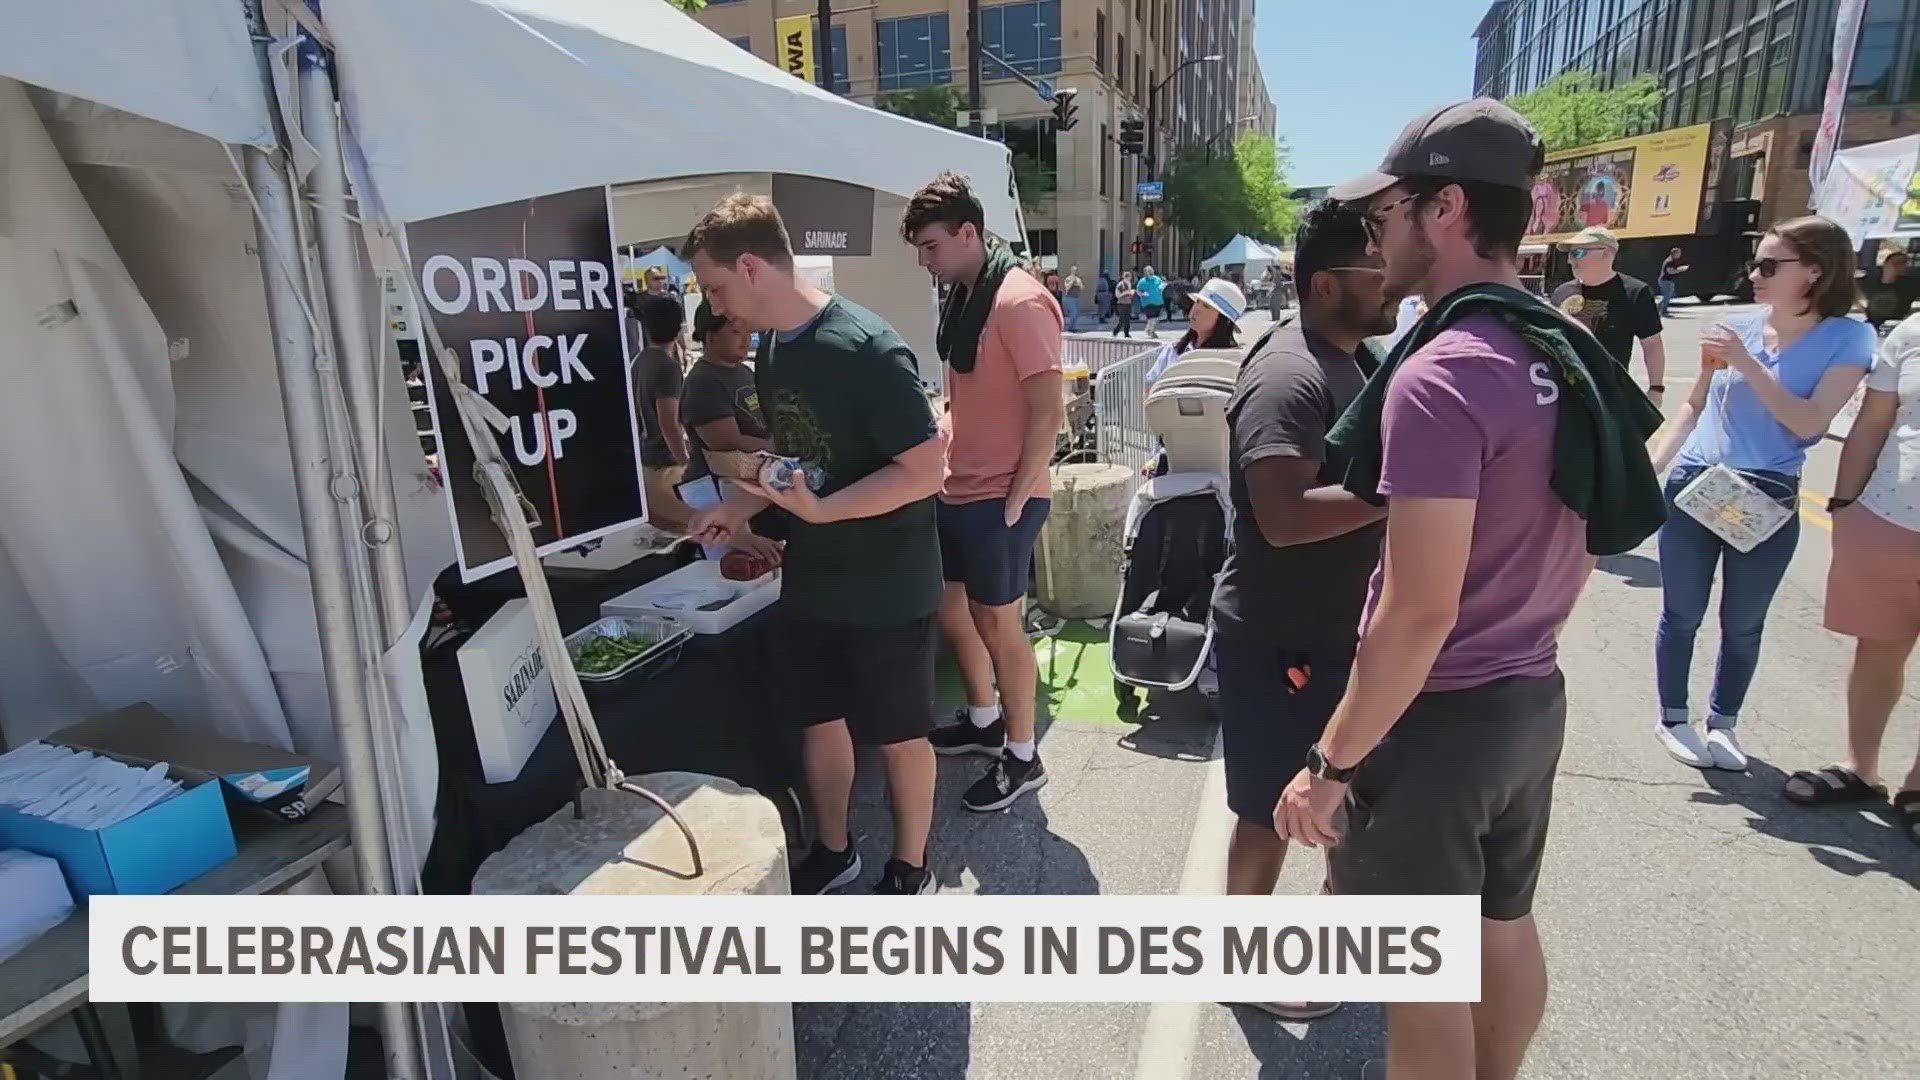 The festival put on by Iowa Asian Alliance invites visitors to explore more than a dozen villages bursting with authentic food, culture, history and more.